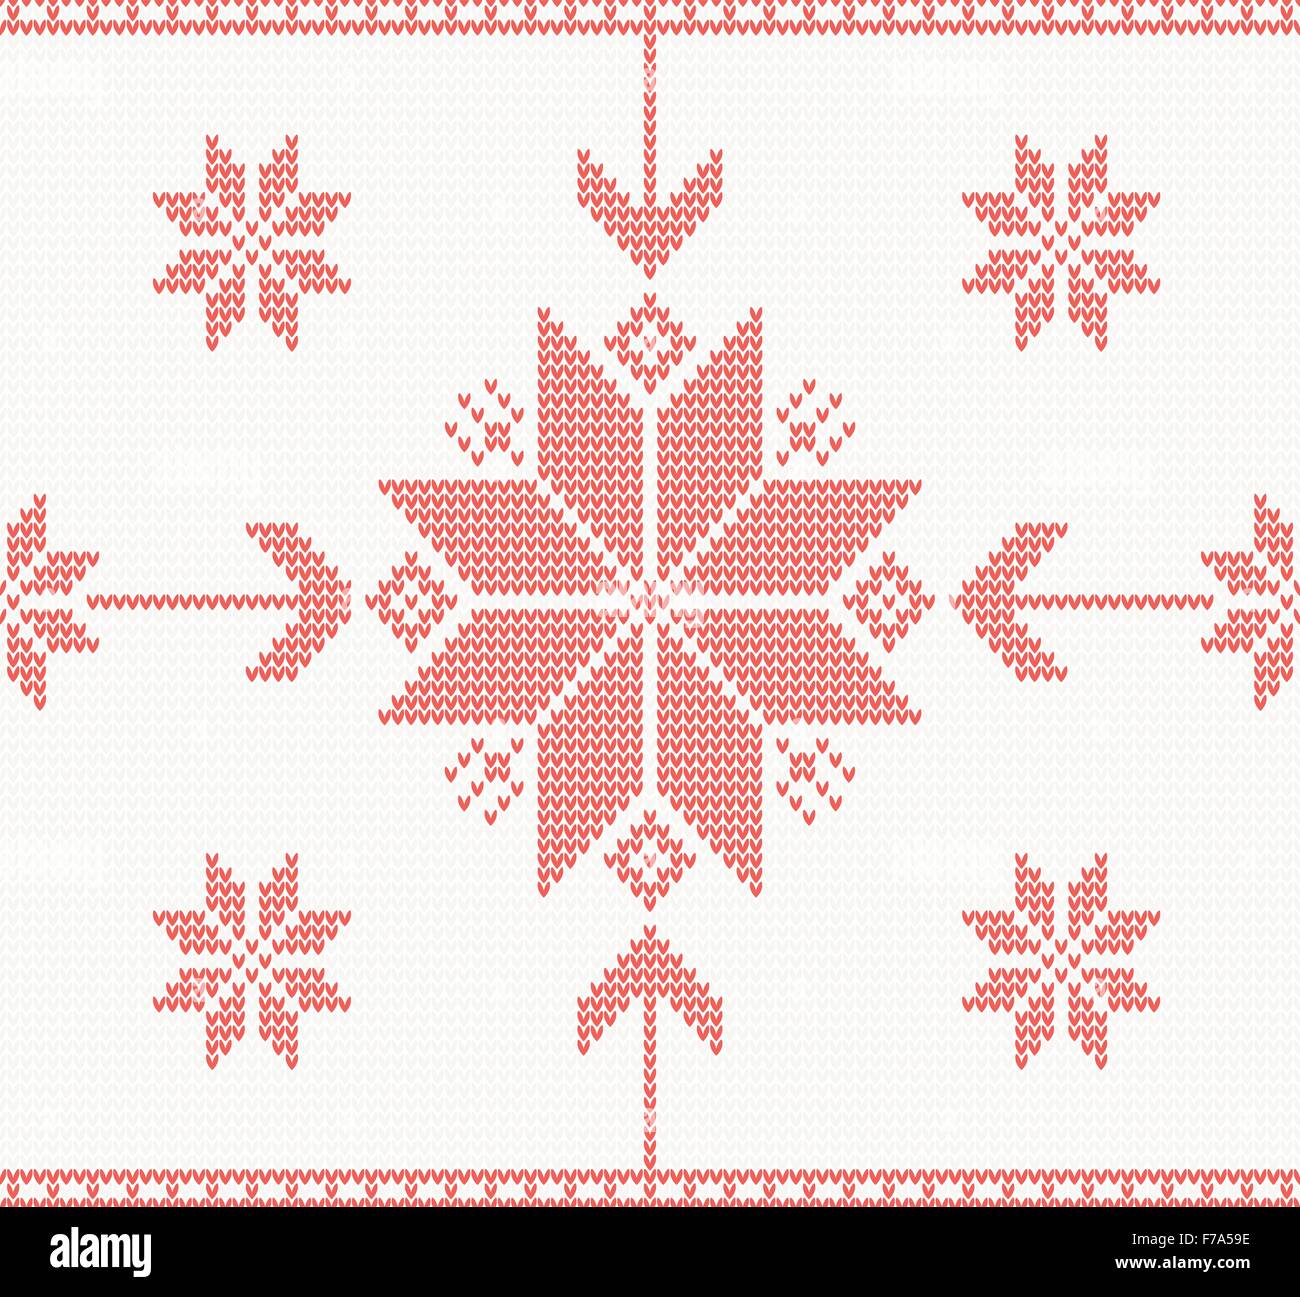 Knitted stars in Norwegian style vector seamless pattern Stock Vector